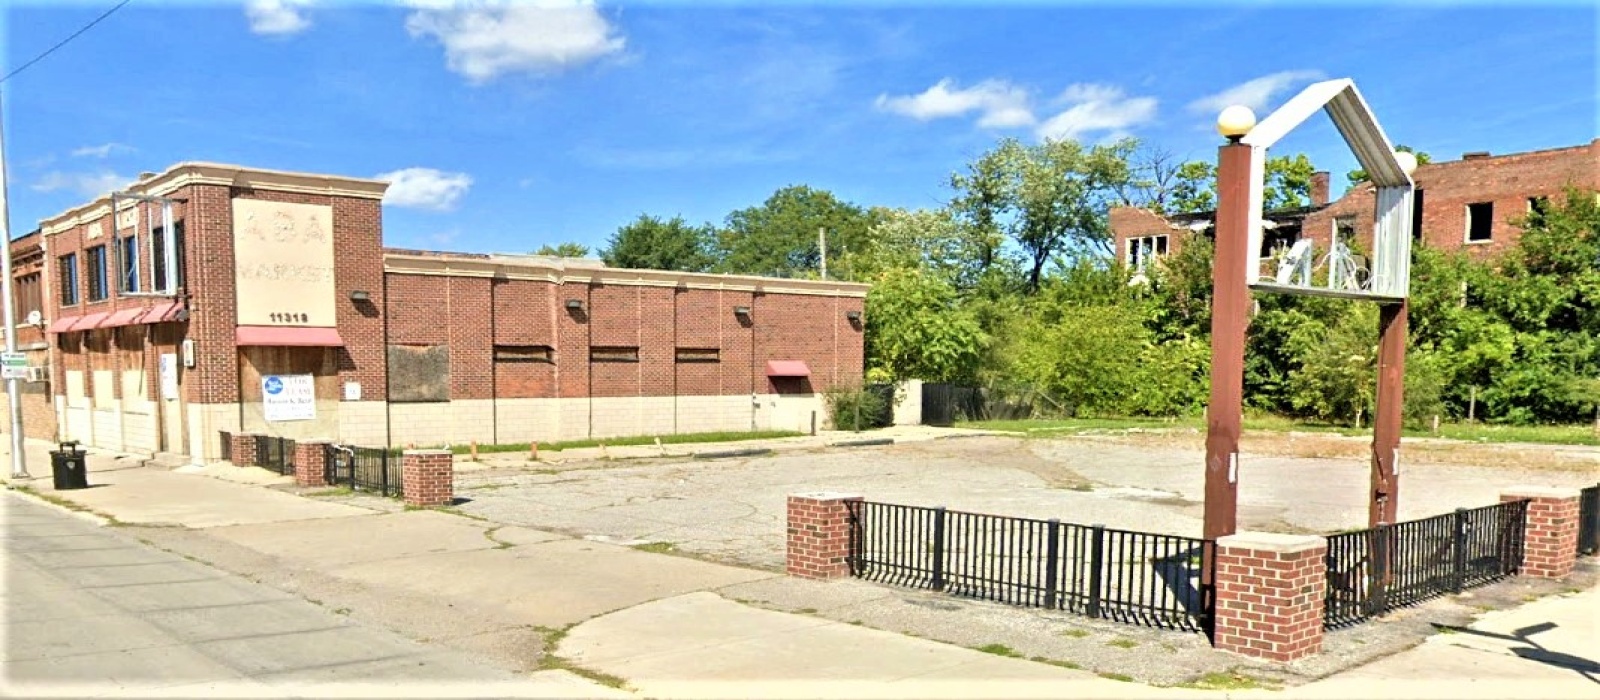 11318, Detroit, Michigan 48202, ,Office,For Sale or Lease,11318,1039